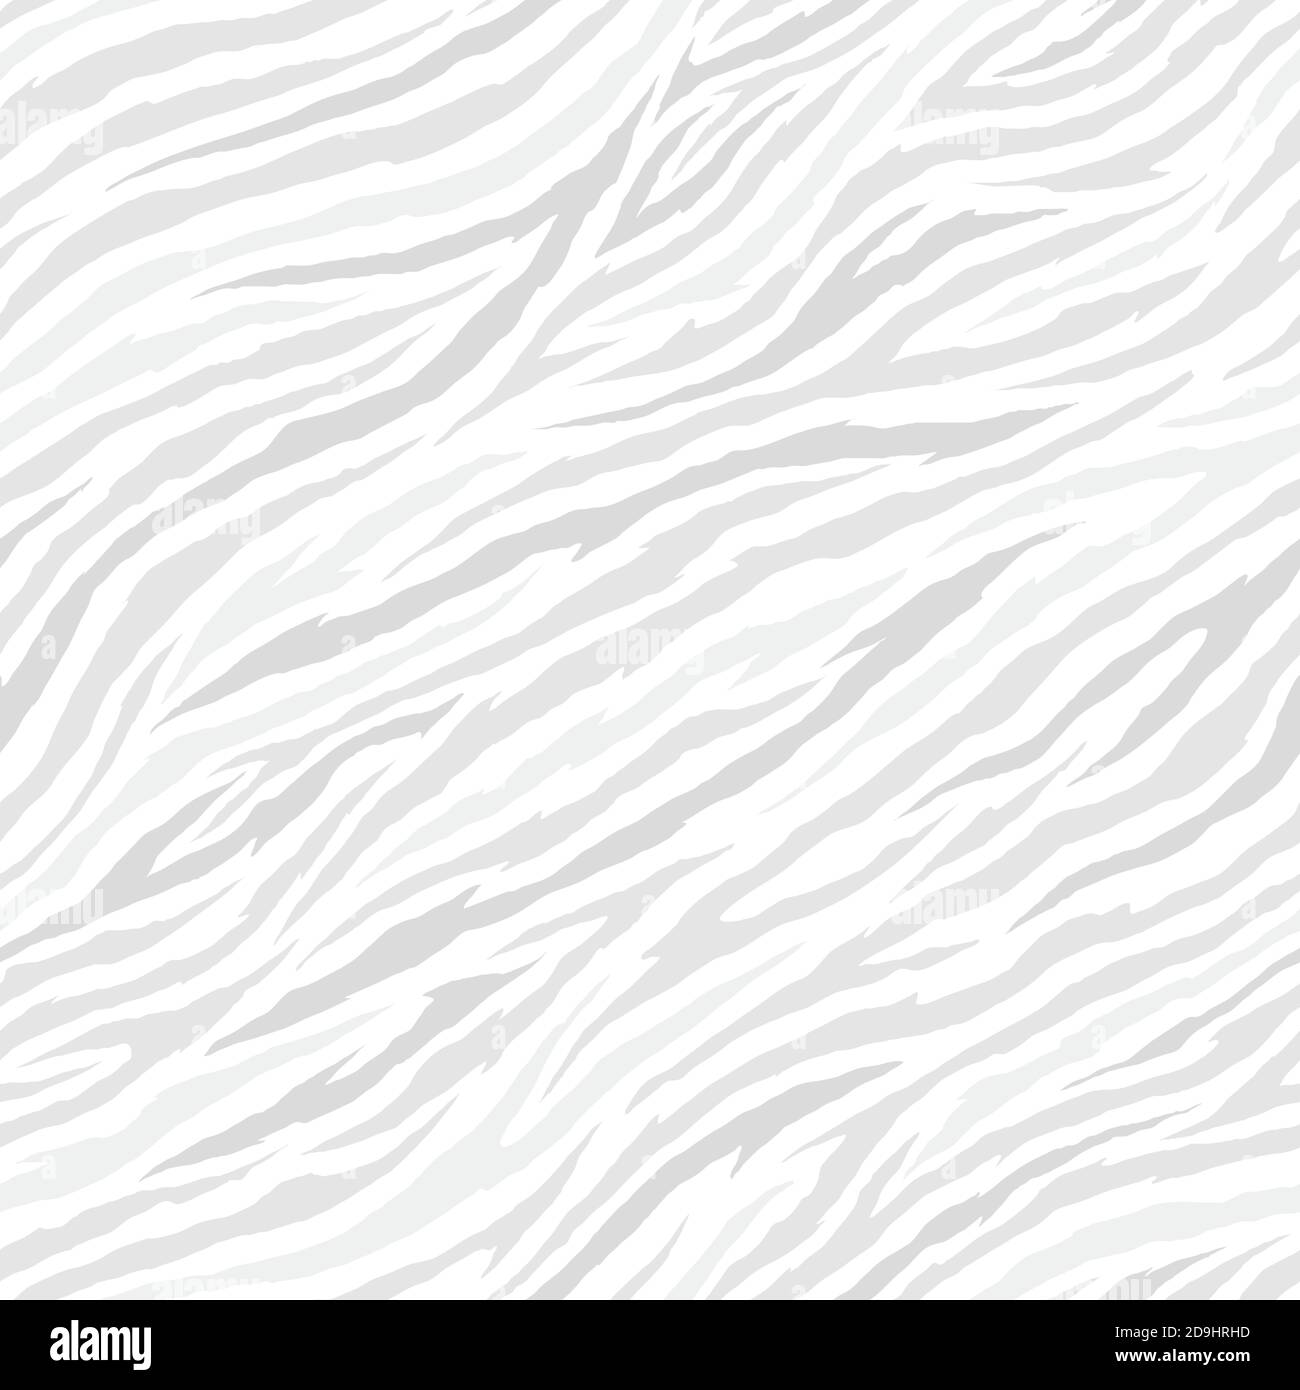 Subtle zebra seamless pattern. Animal skin vector illustration pattern for surface, t shirt design, print, poster, icon, web, graphic designs. Stock Vector